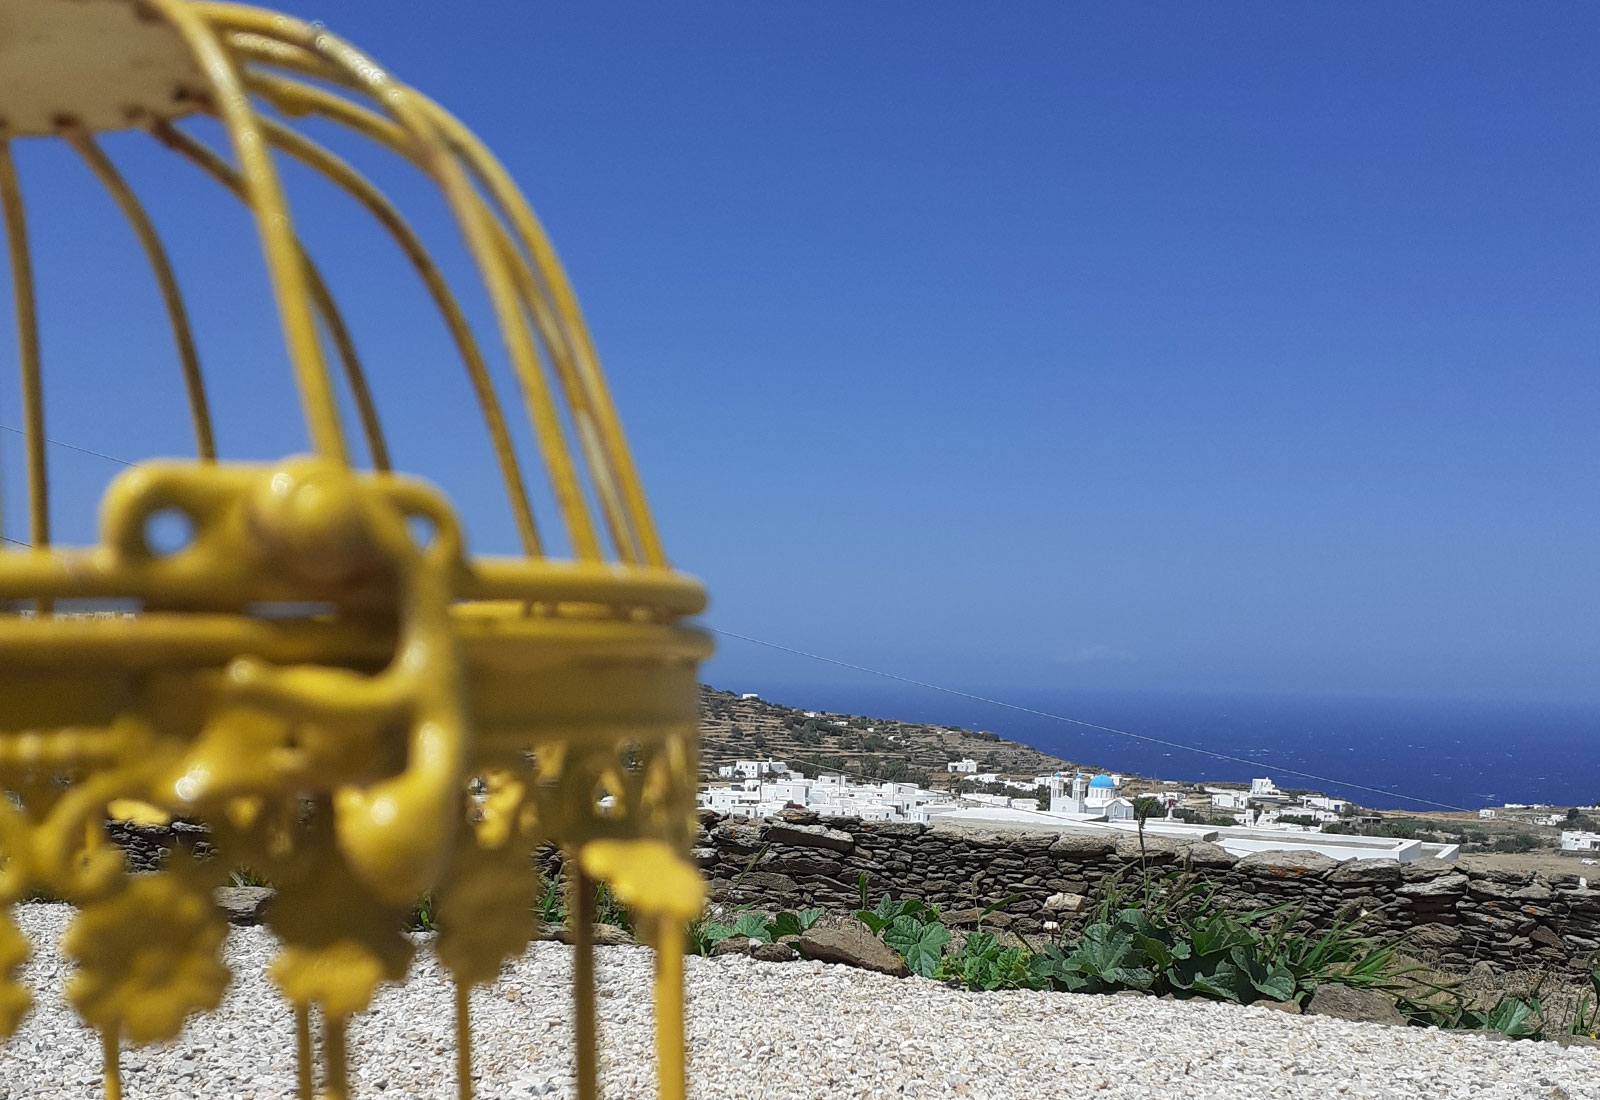 ViewLight accommodation in Sifnos